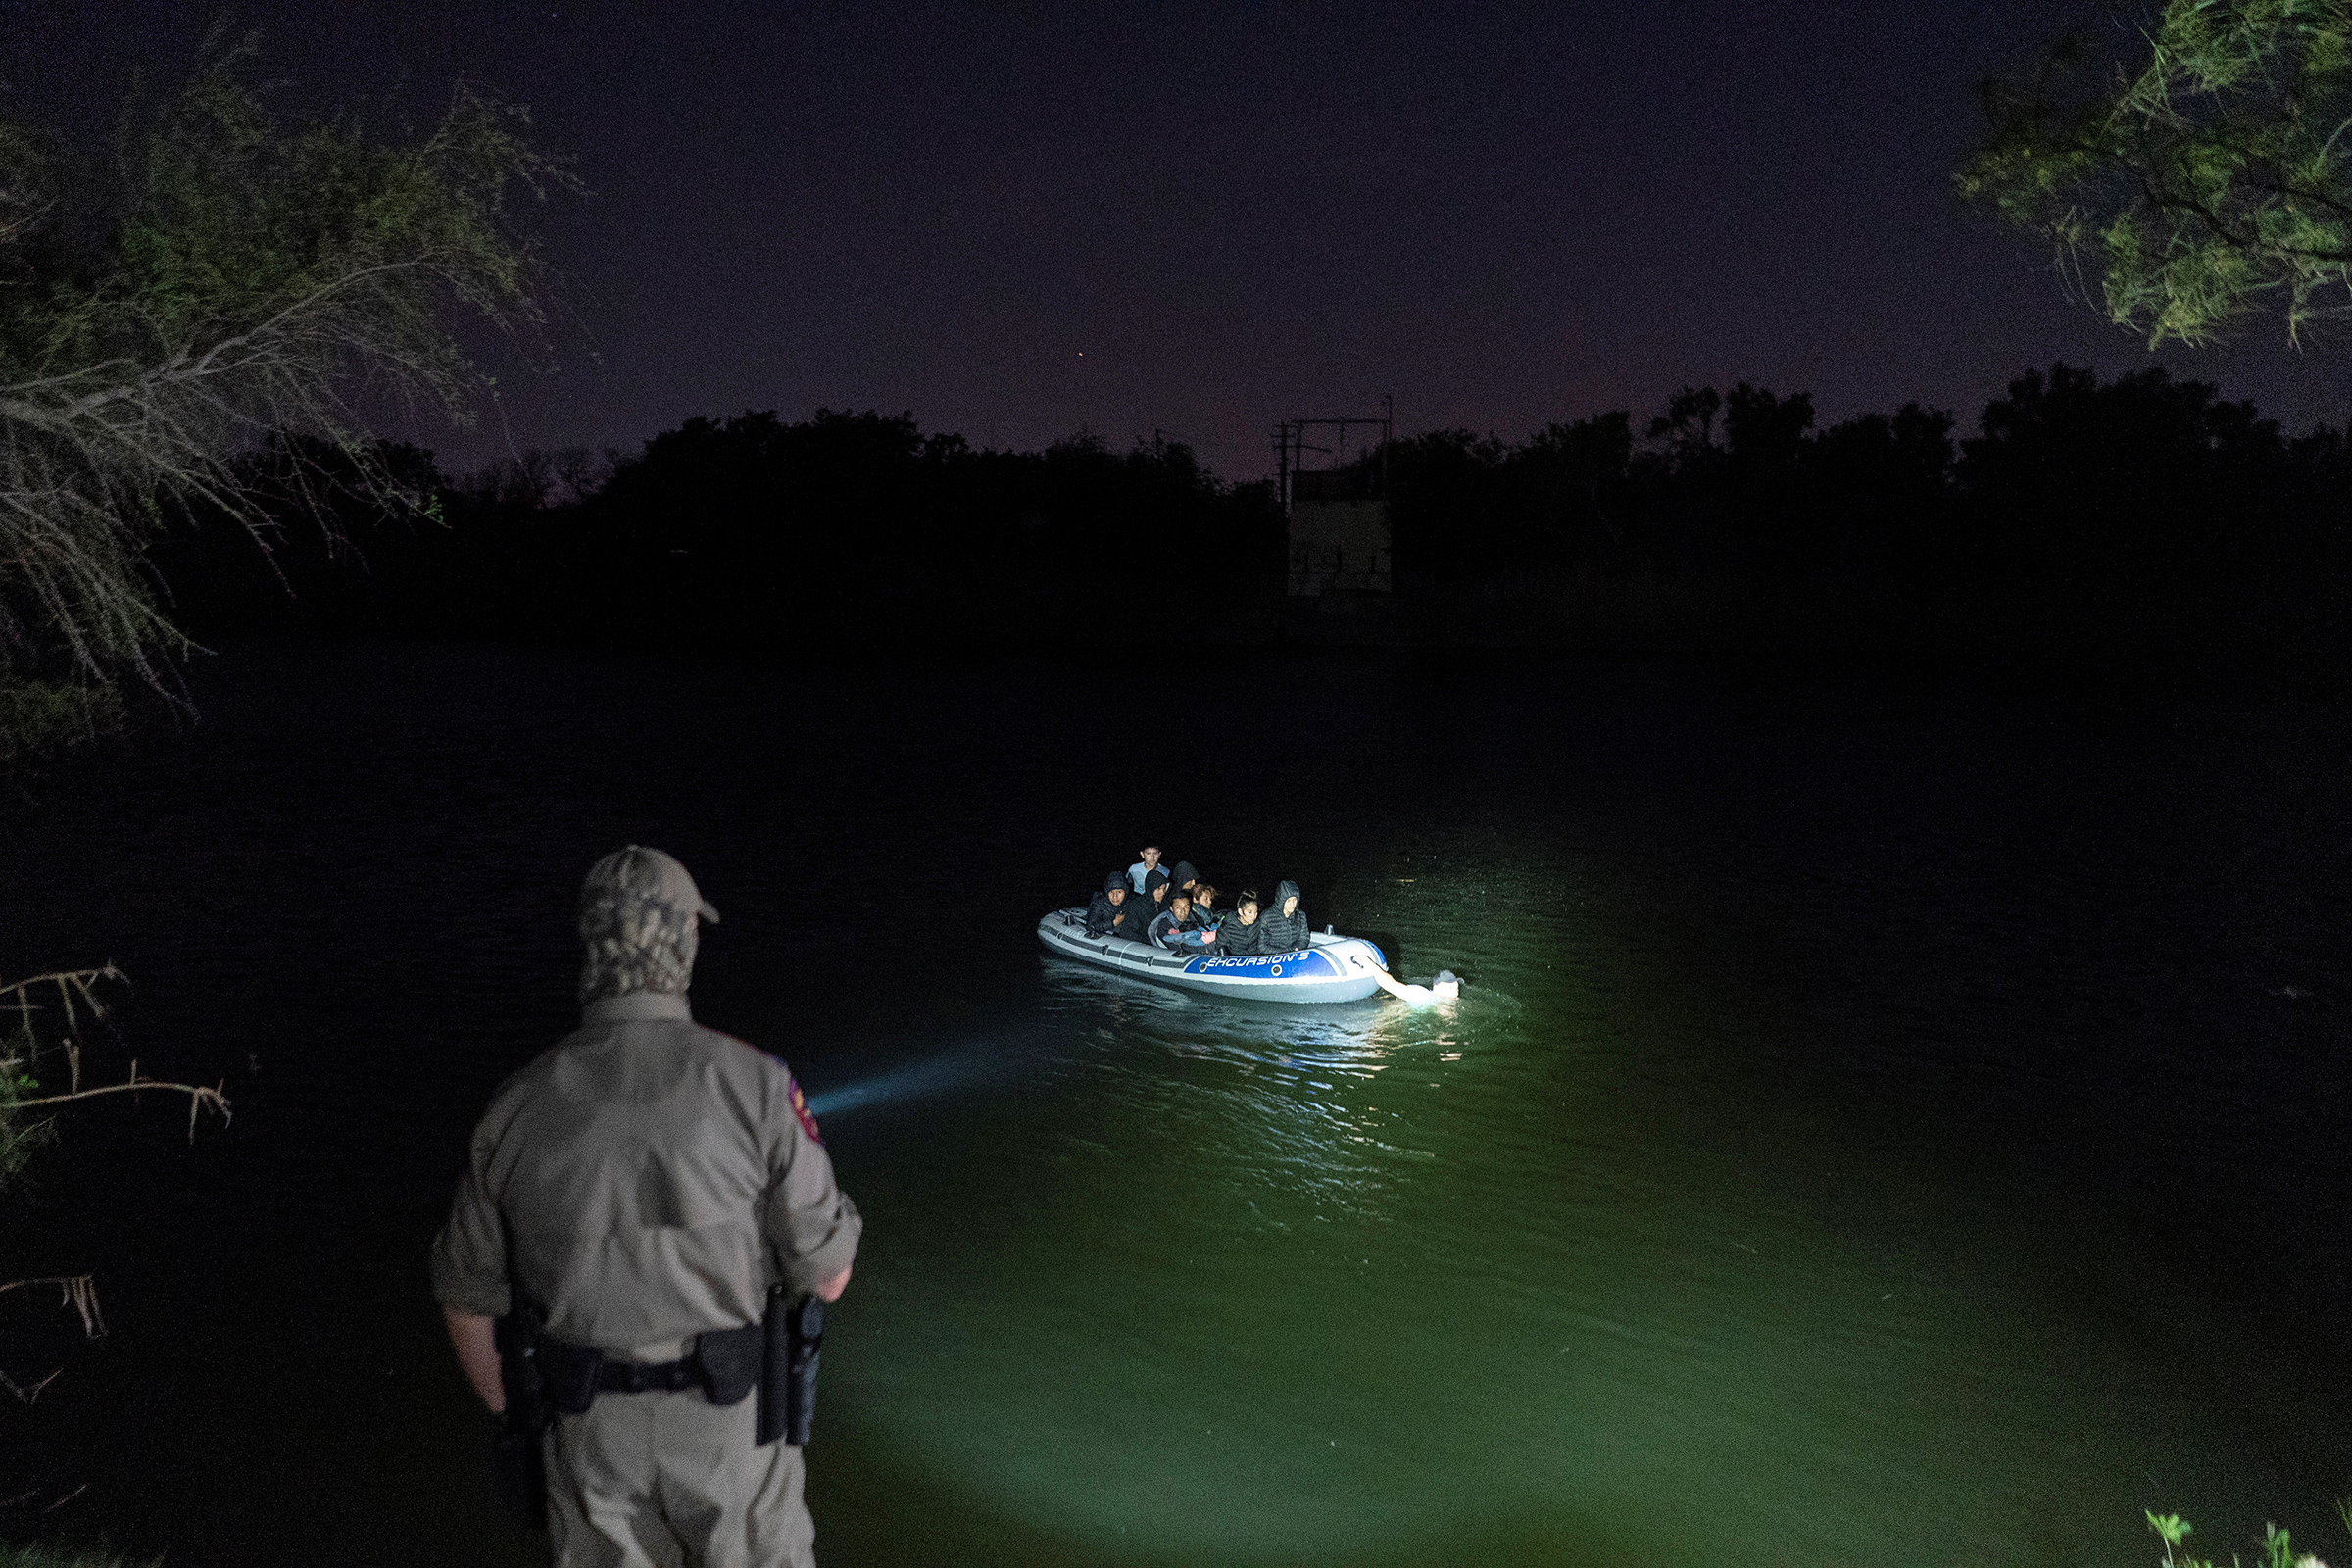 Asylum-seeking migrants' families cross the Rio Grande from Mexico as a Texas State Trooper officer points a flashlight at the inflatable raft in Roma, Texas, on April 8, 2021. The raft later turned back to the Mexican side and did not land on the U.S. side of the river.